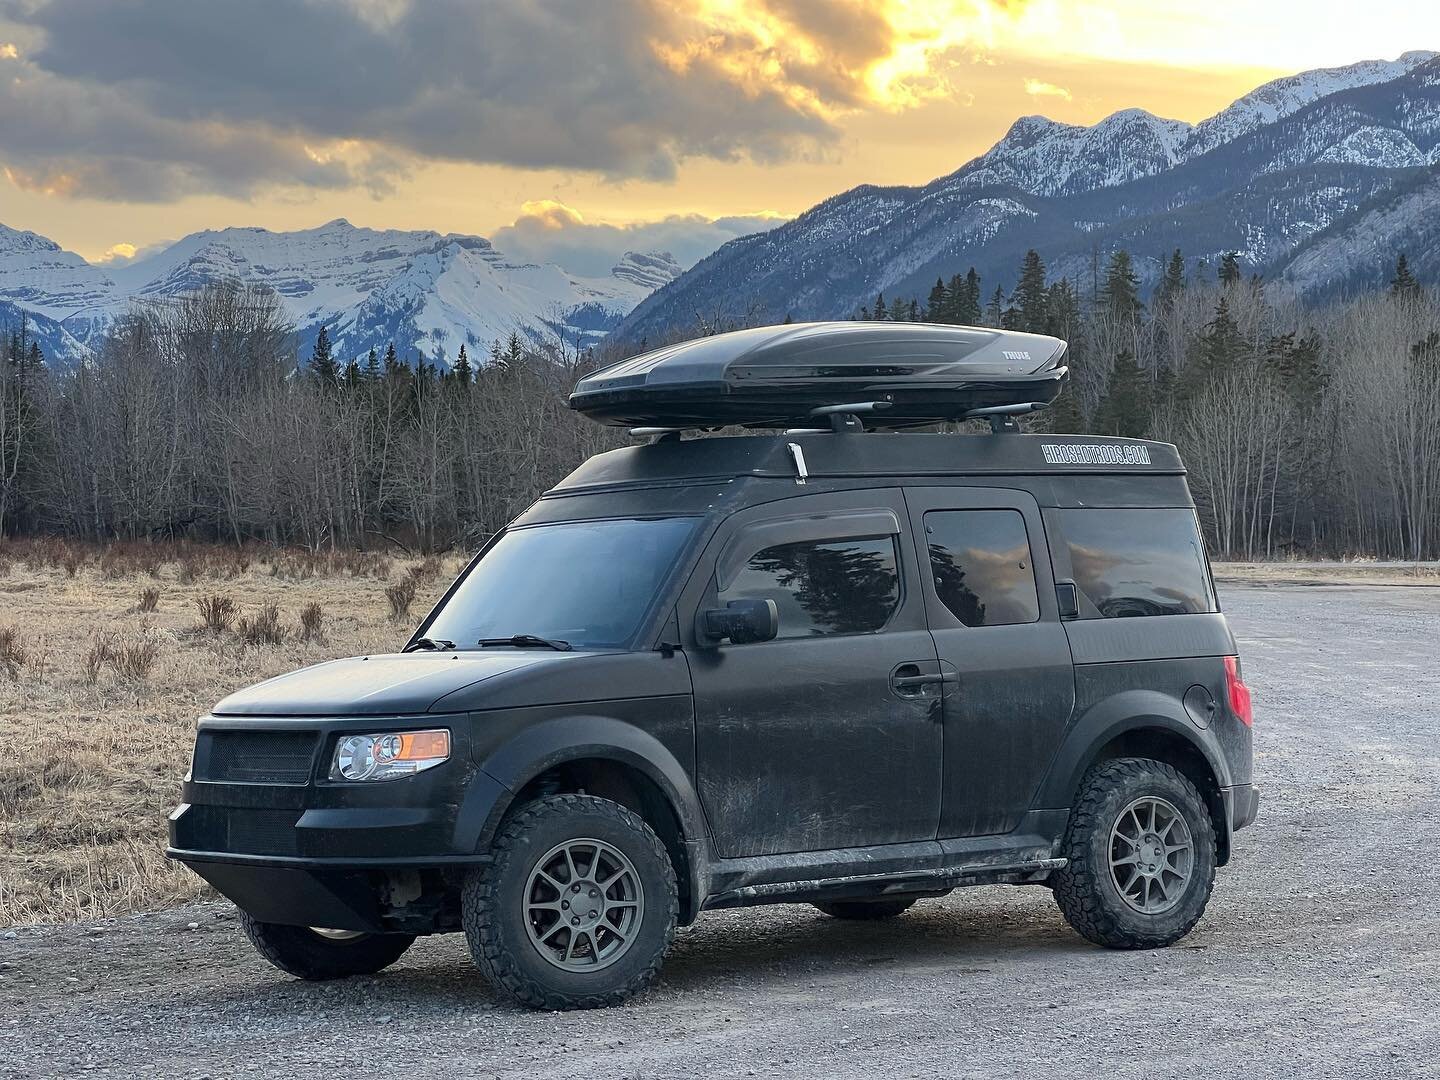 With the weekend rapidly approaching, I&rsquo;m starting to get the itch to get back out in it..!! Love this rig! 🤘🏽

#Hiroshotrods
#HotrodtheWorld
#Hondaelement 
#hondaelementownersclub 
#hondaelementcamping